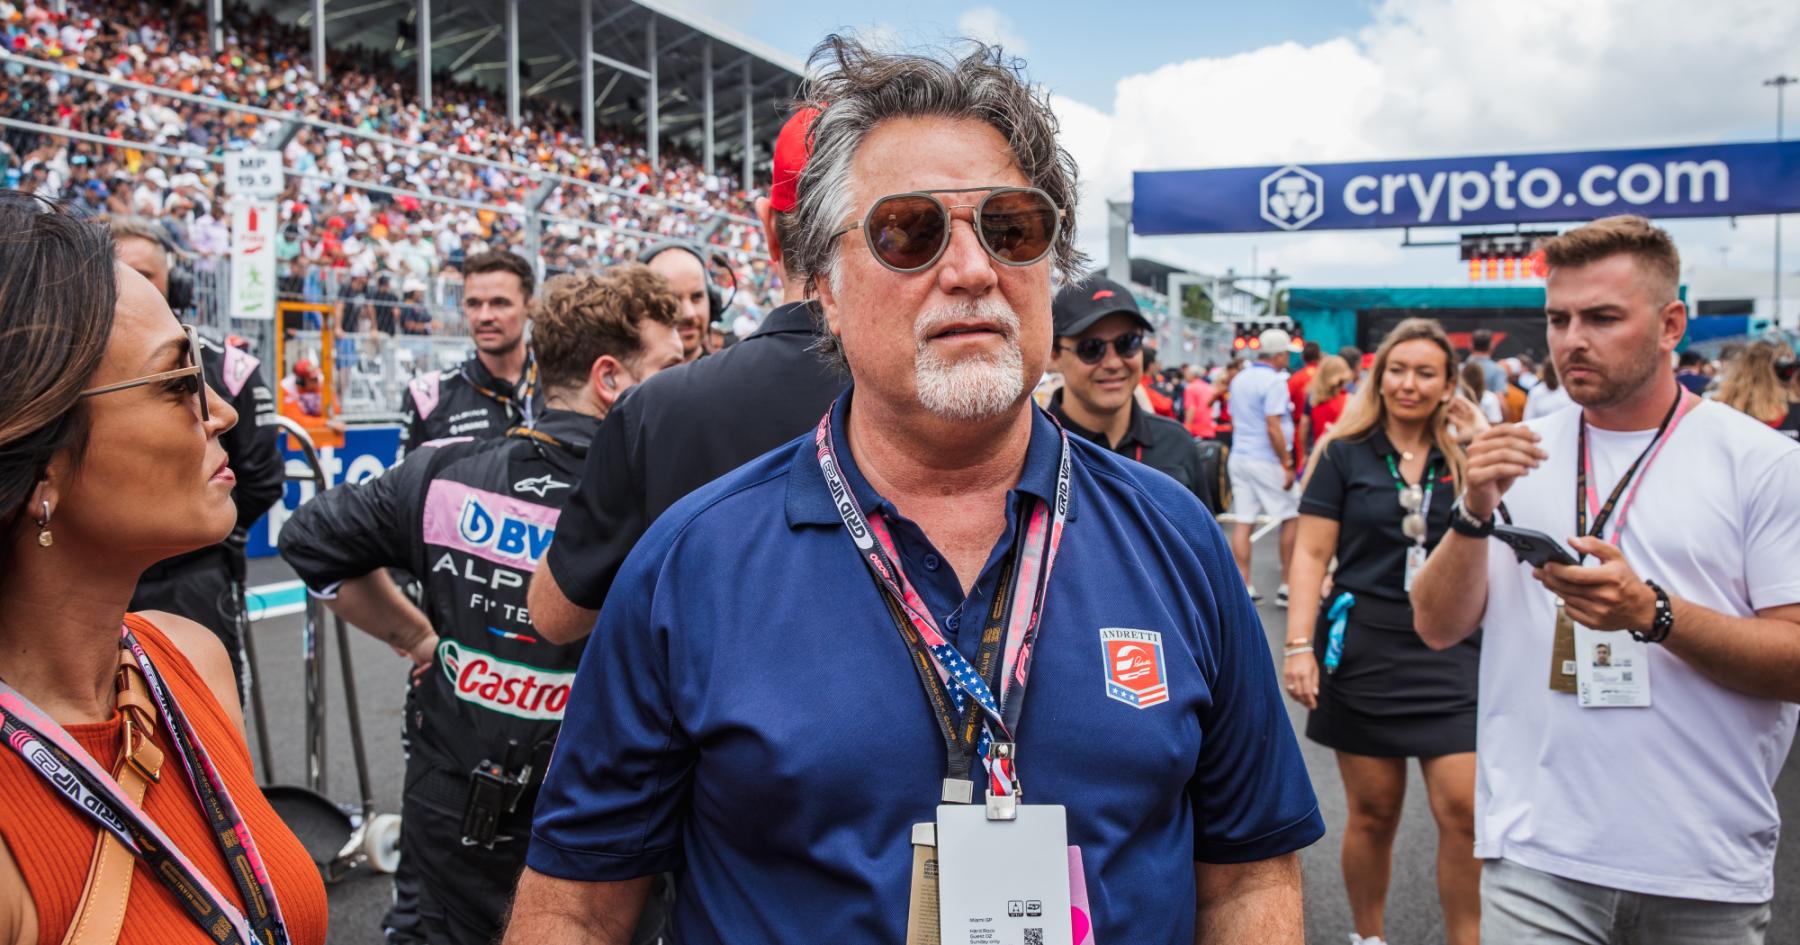 US Congress Seeks Clarification from Liberty Regarding Andretti F1 Rejection